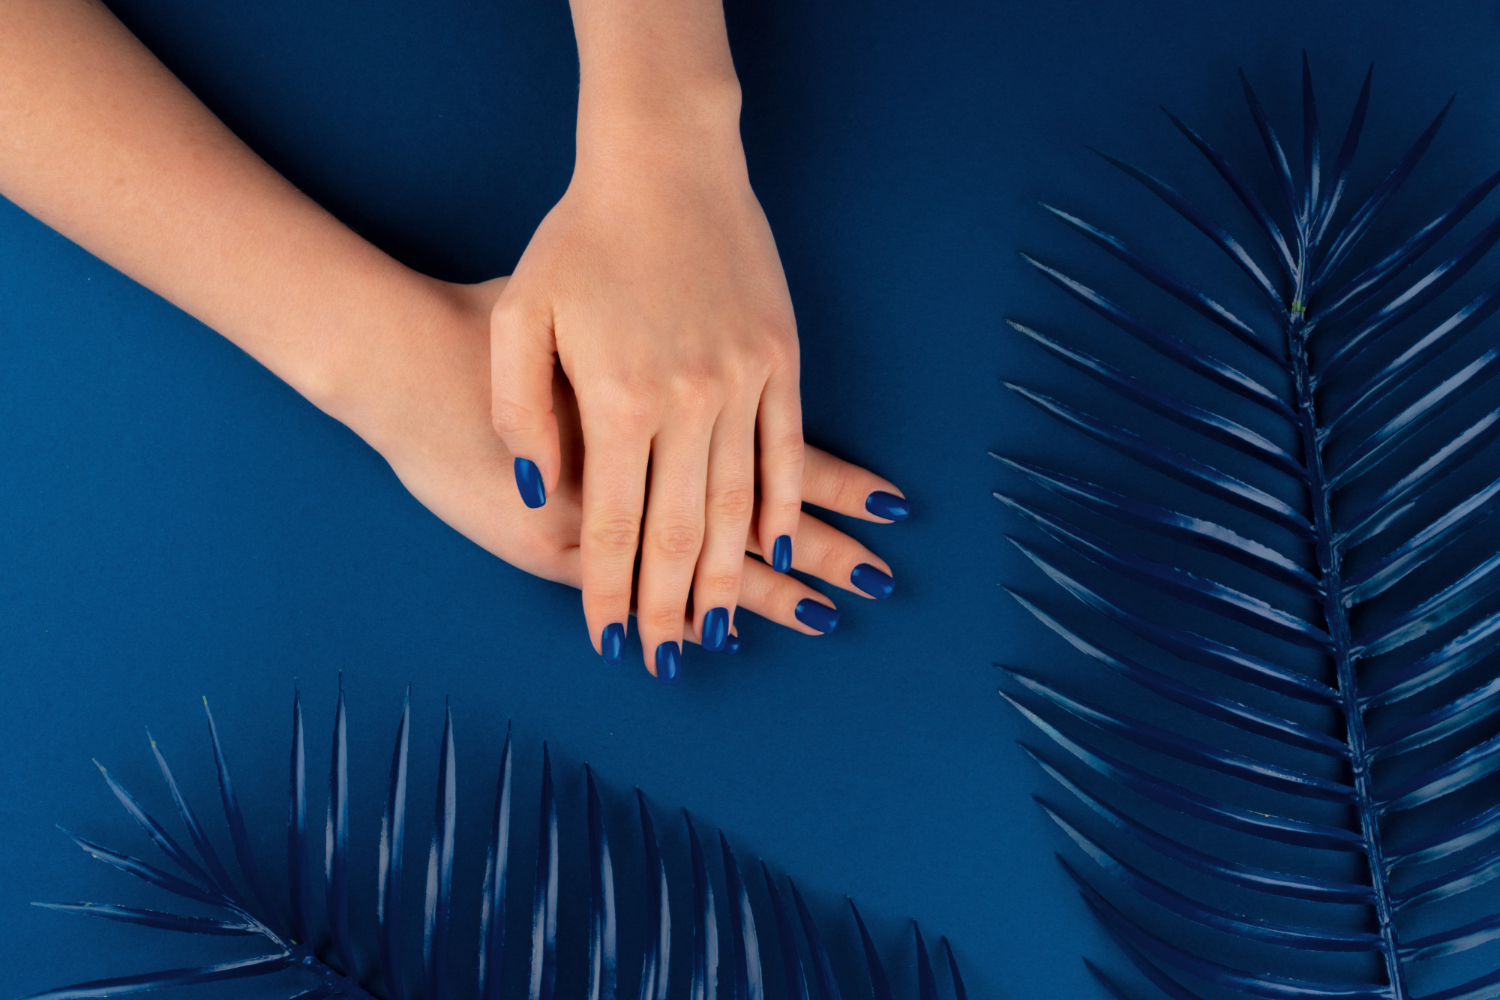 female-hands-with-manicure-classic-blue-color-blue-background-close-up